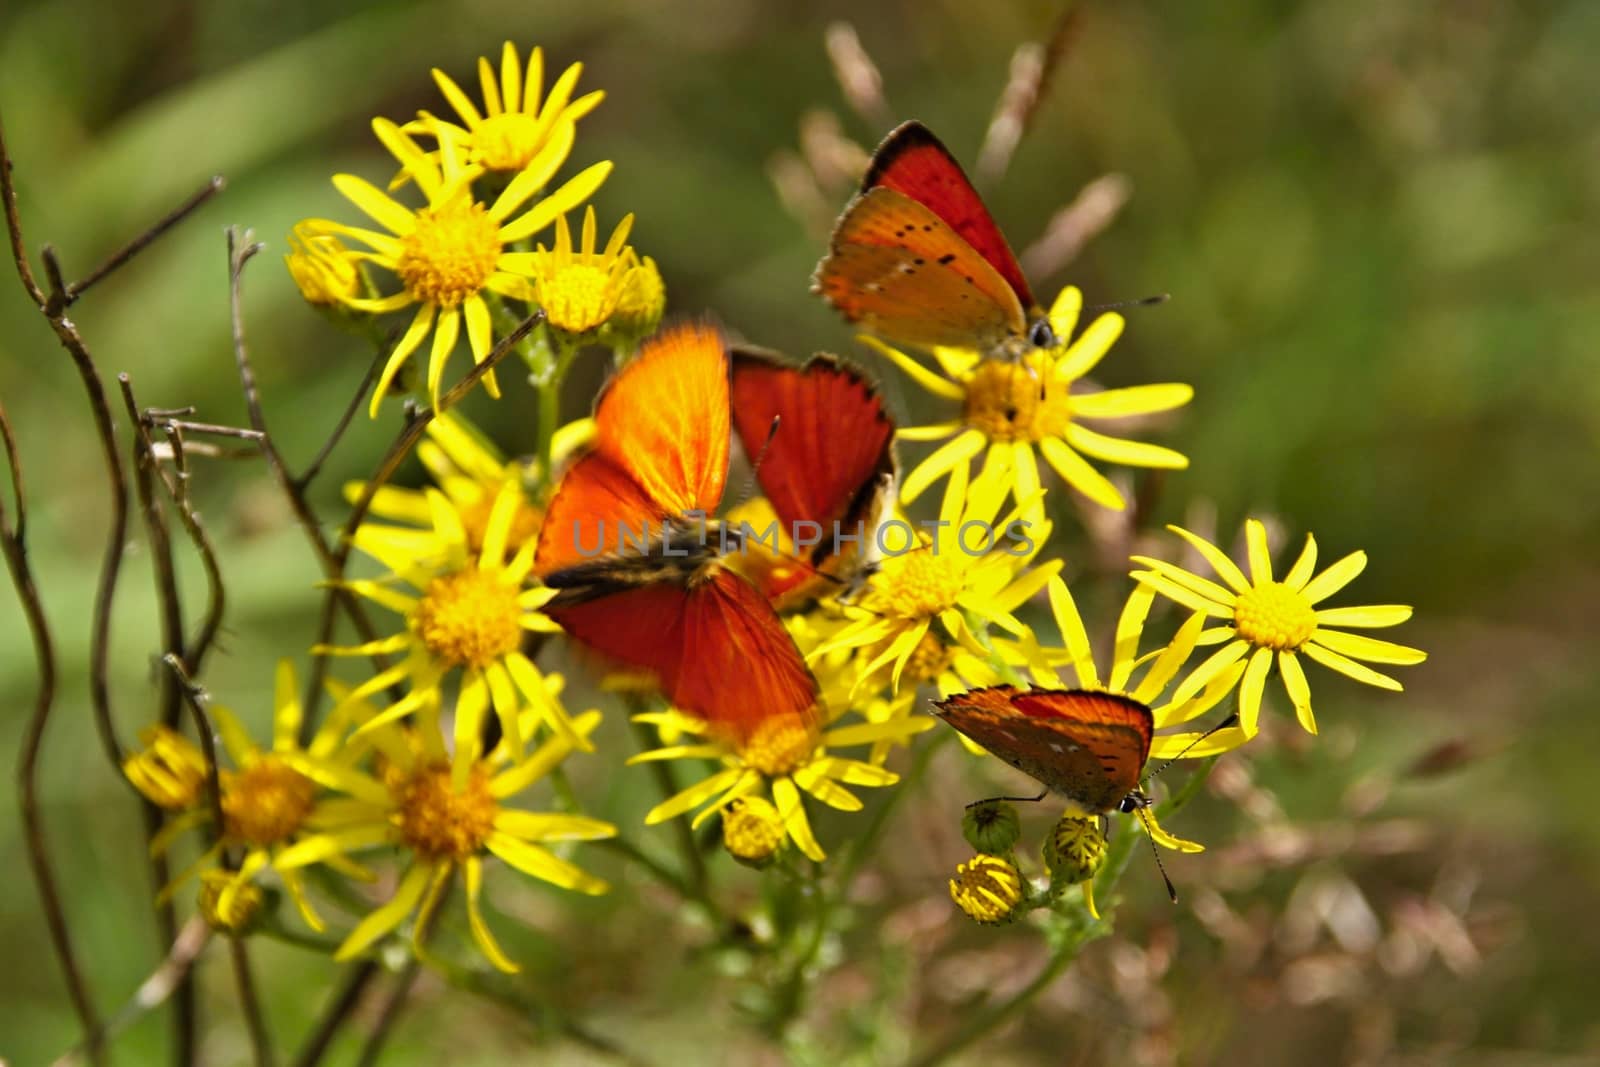 Many red butterflies on yellow flowers by jnerad